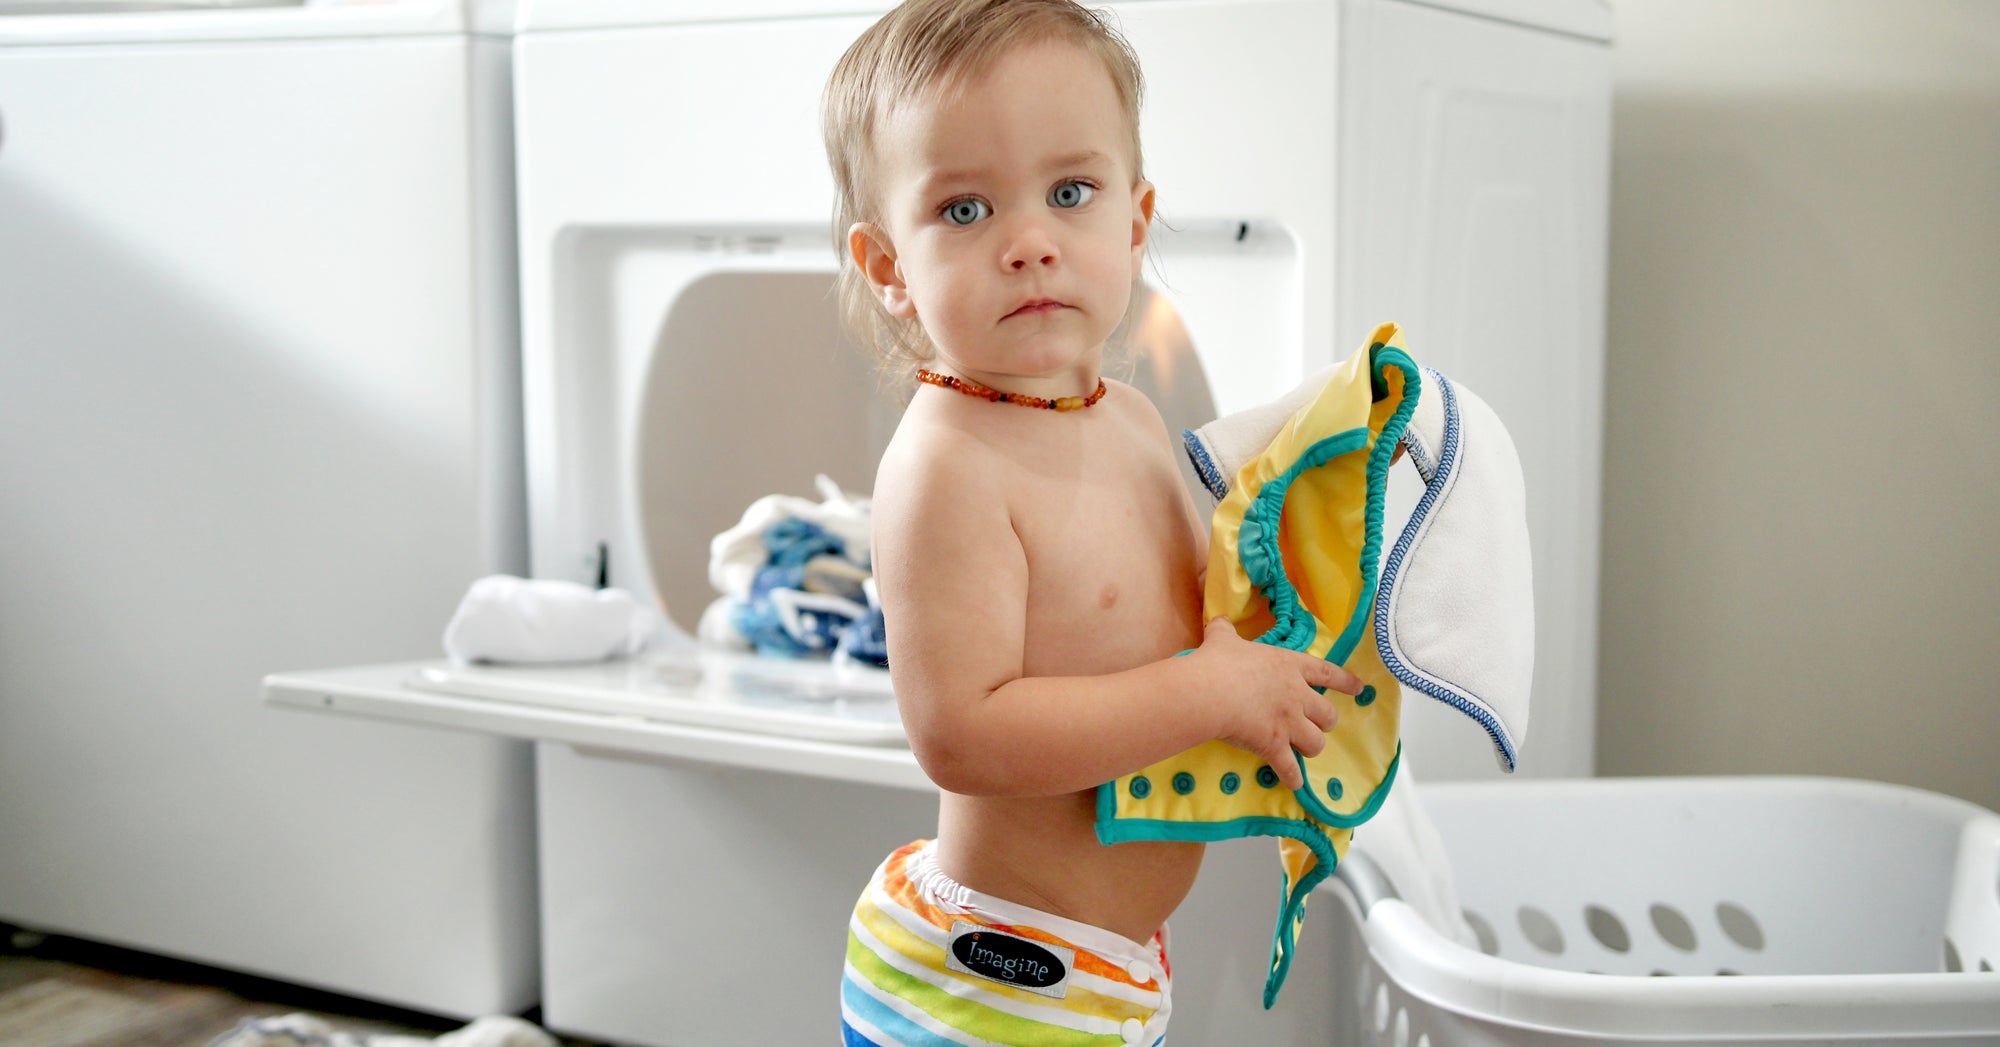 How to Clean Cloth Diapers: A Simple Starter Guide to Washing Cloth Diapers